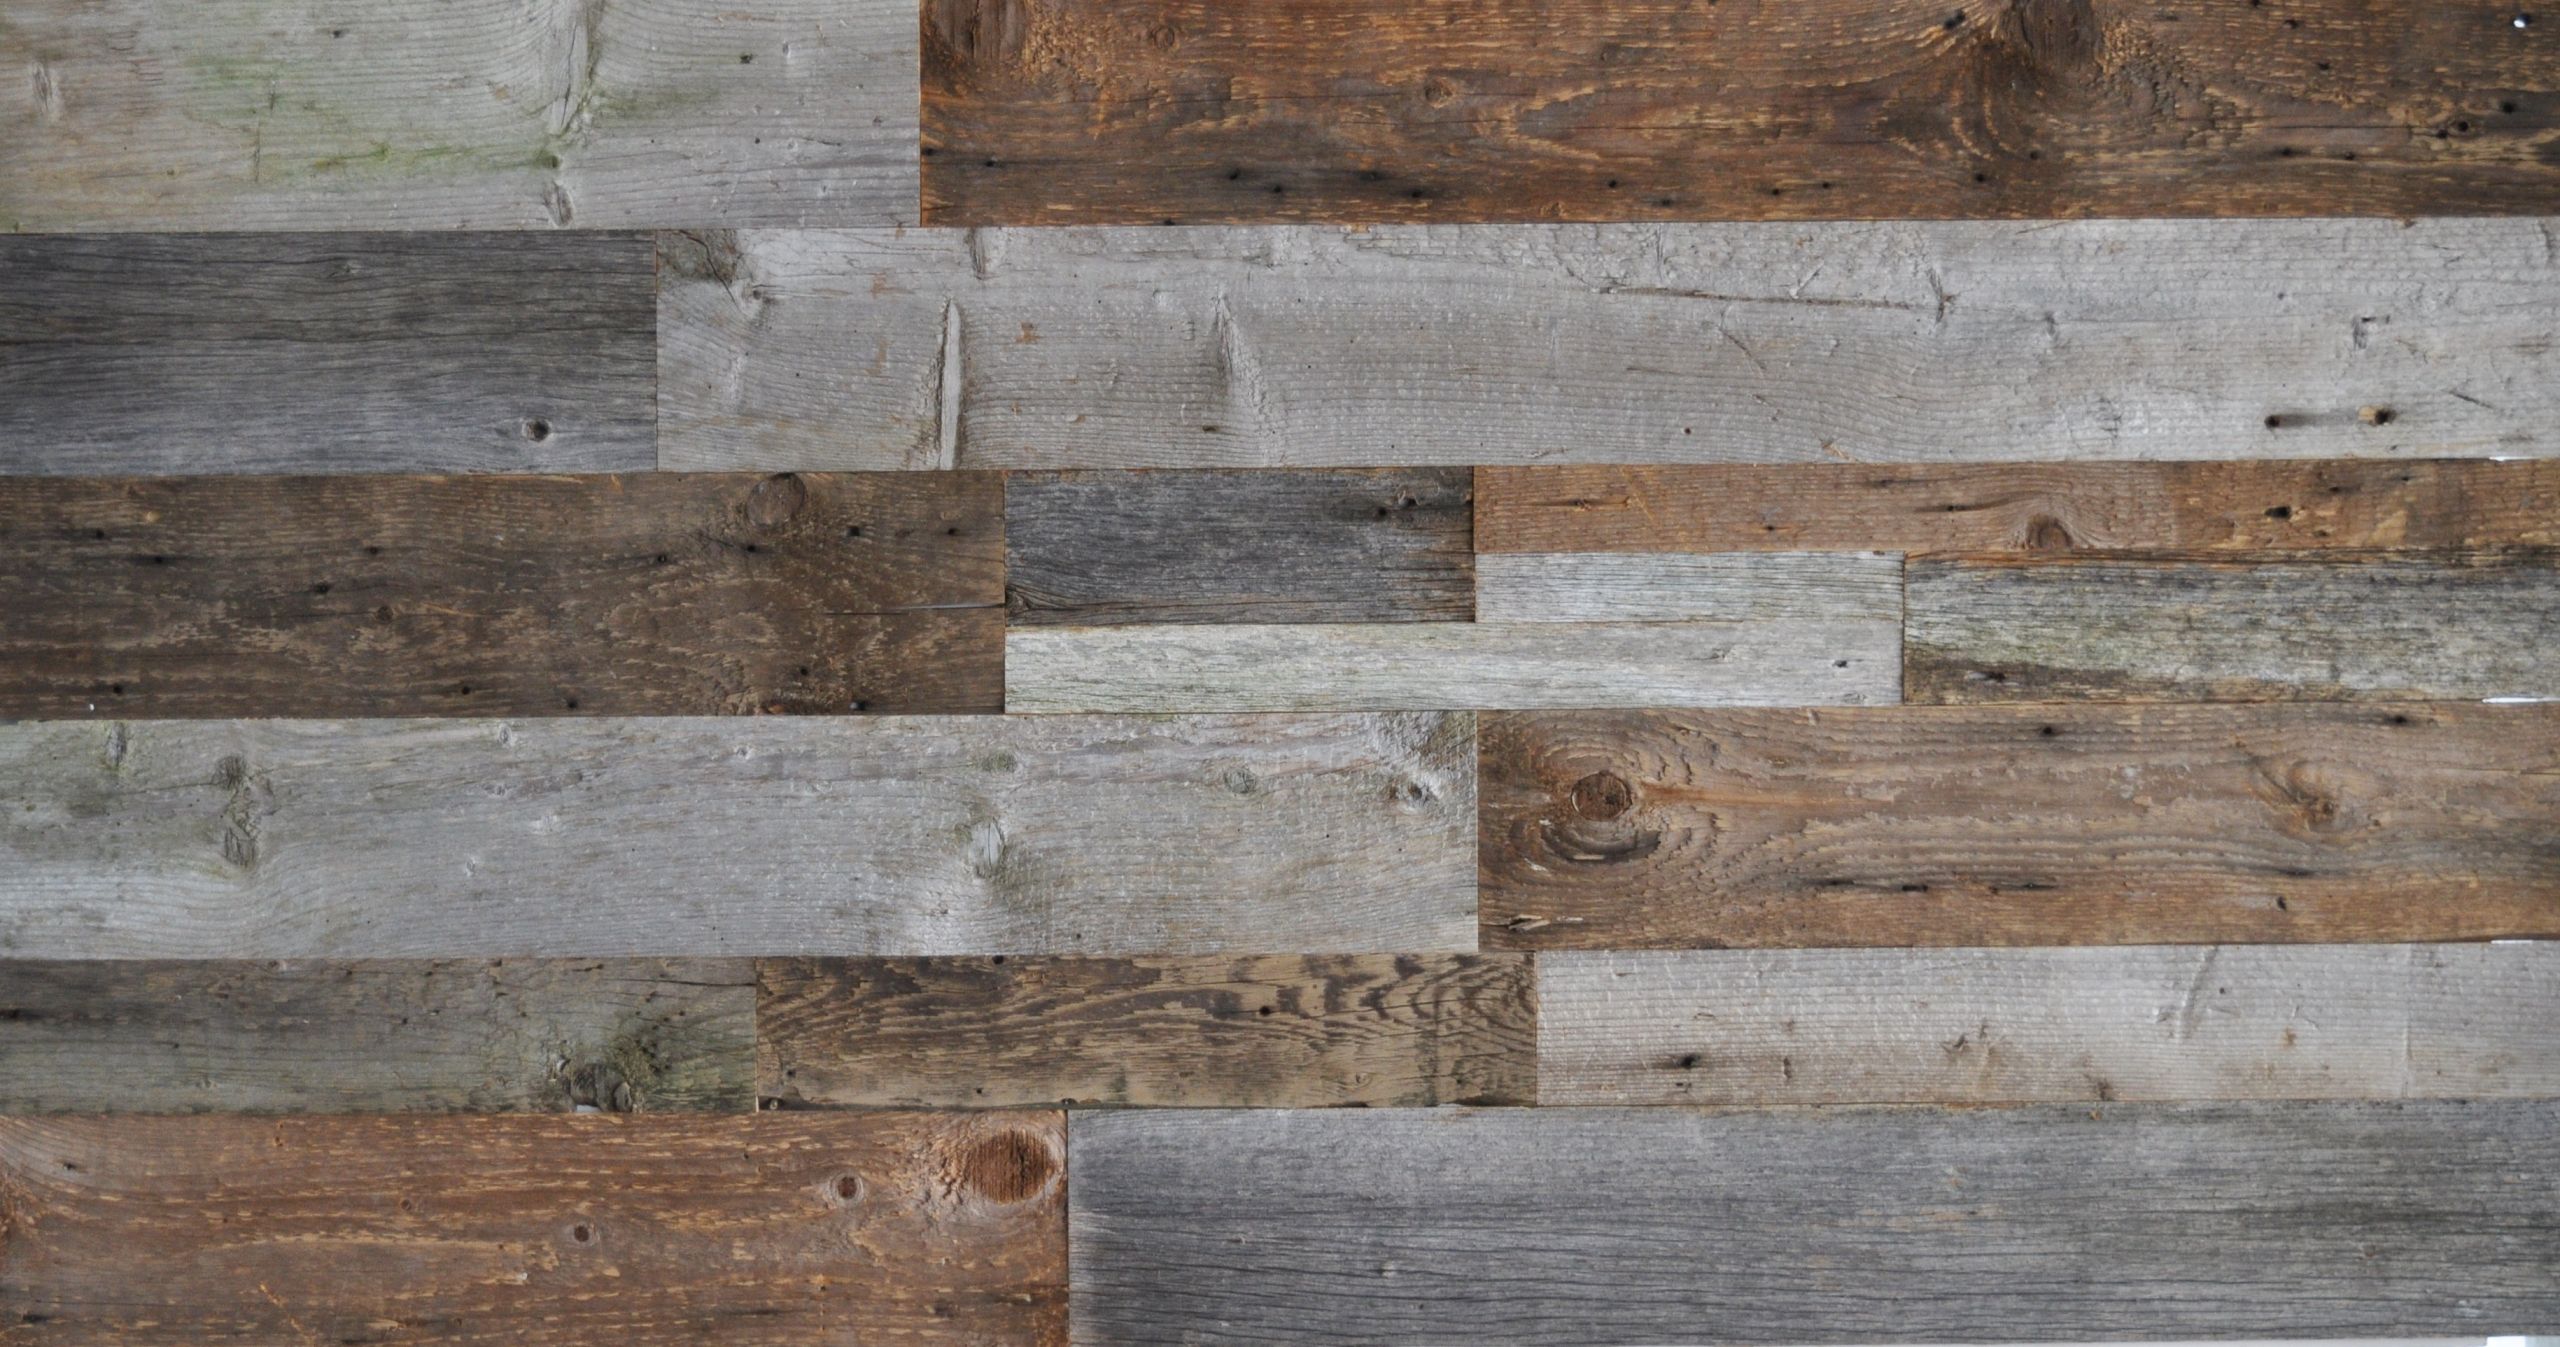 Reclaimed Barn Wood Flooring DIY
 DIY Reclaimed Wood Accent Wall Grey and Natural Brown